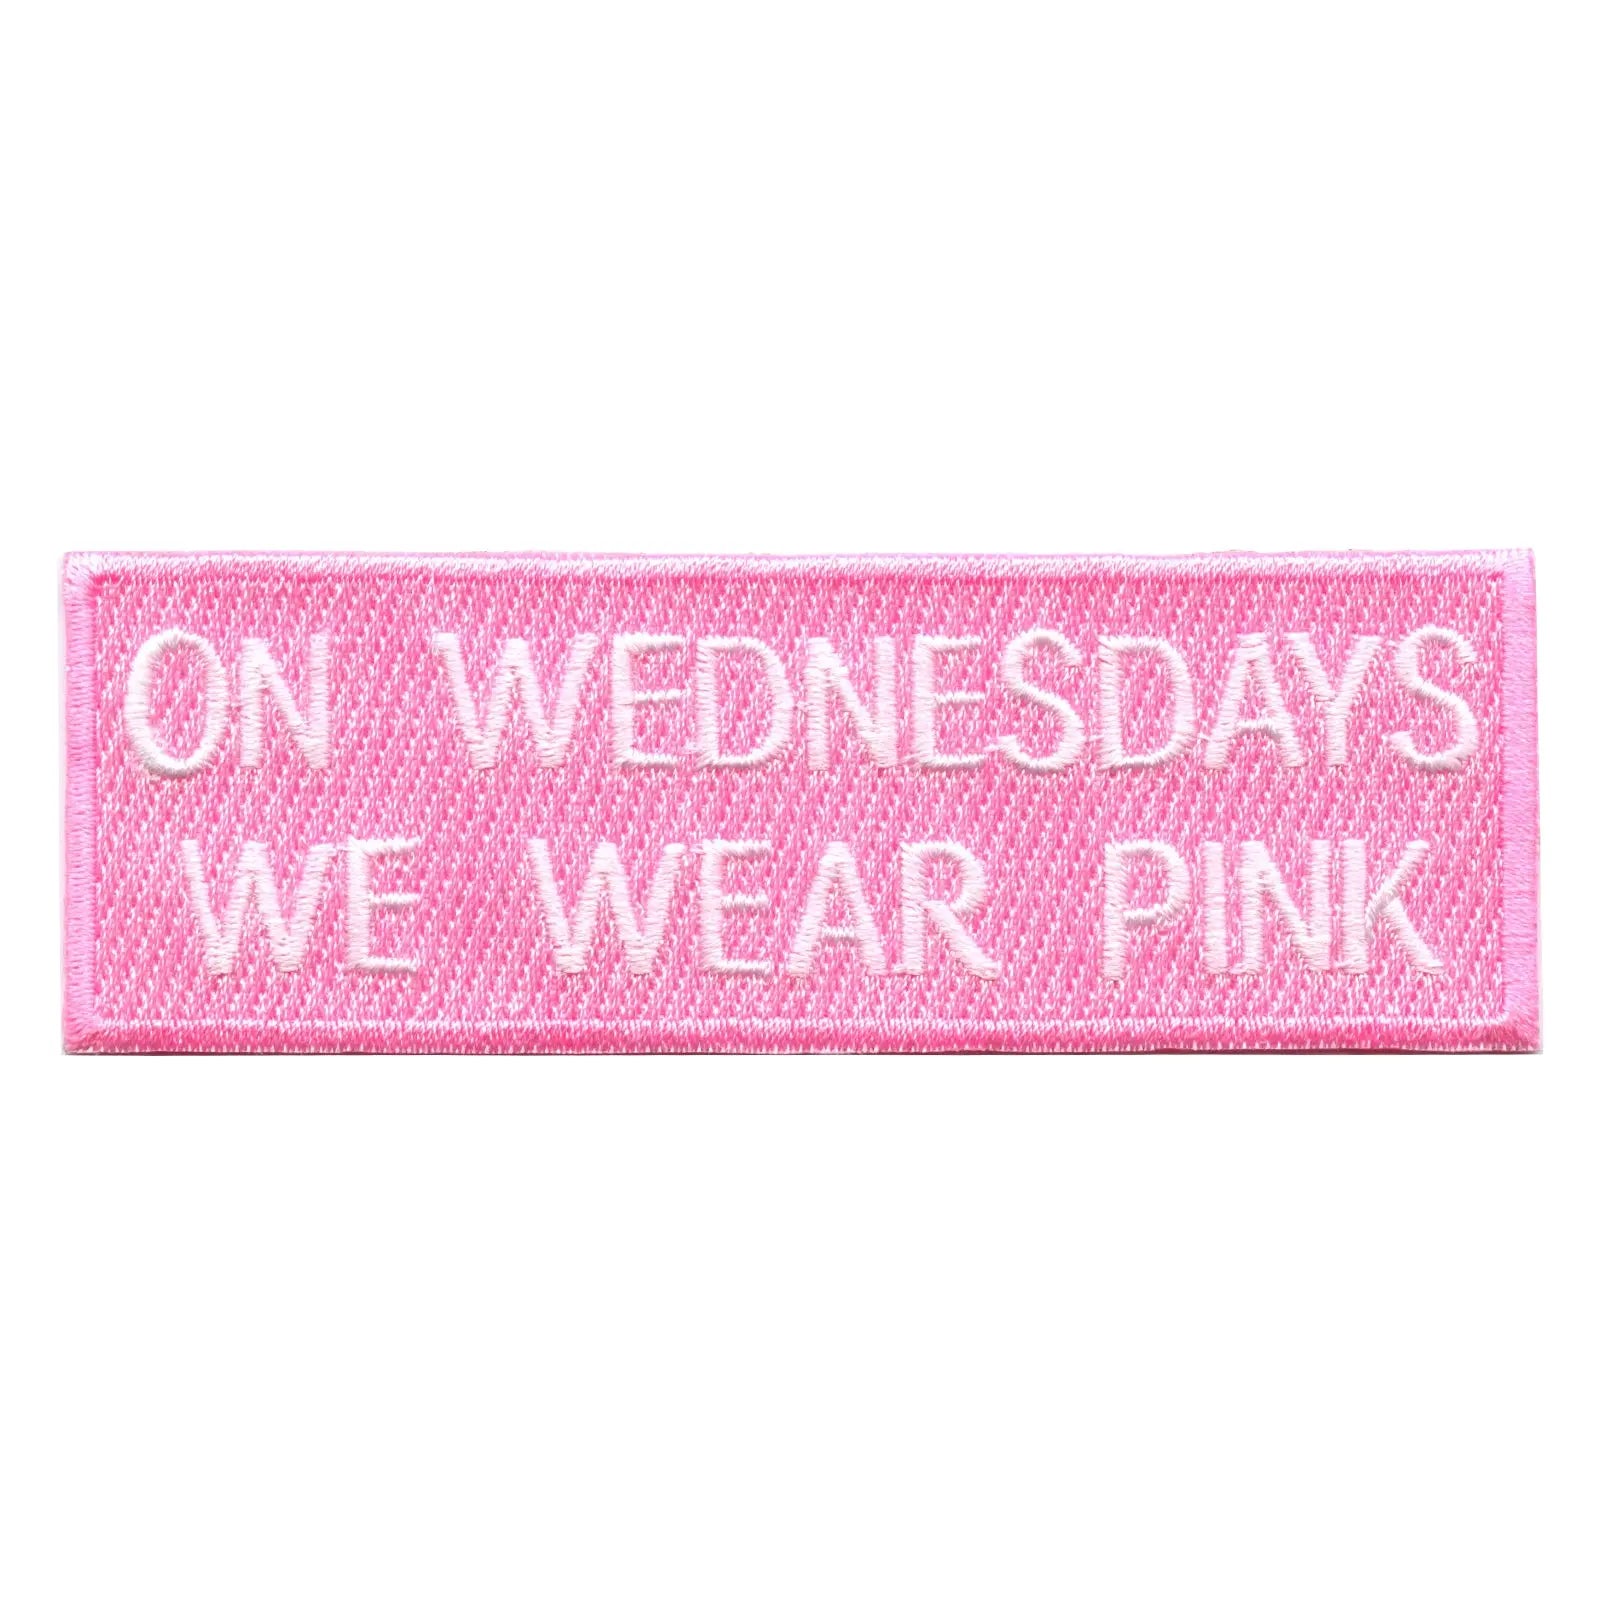 On Wednesdays We Wear Pink Embroidered Iron On Patch – Patch